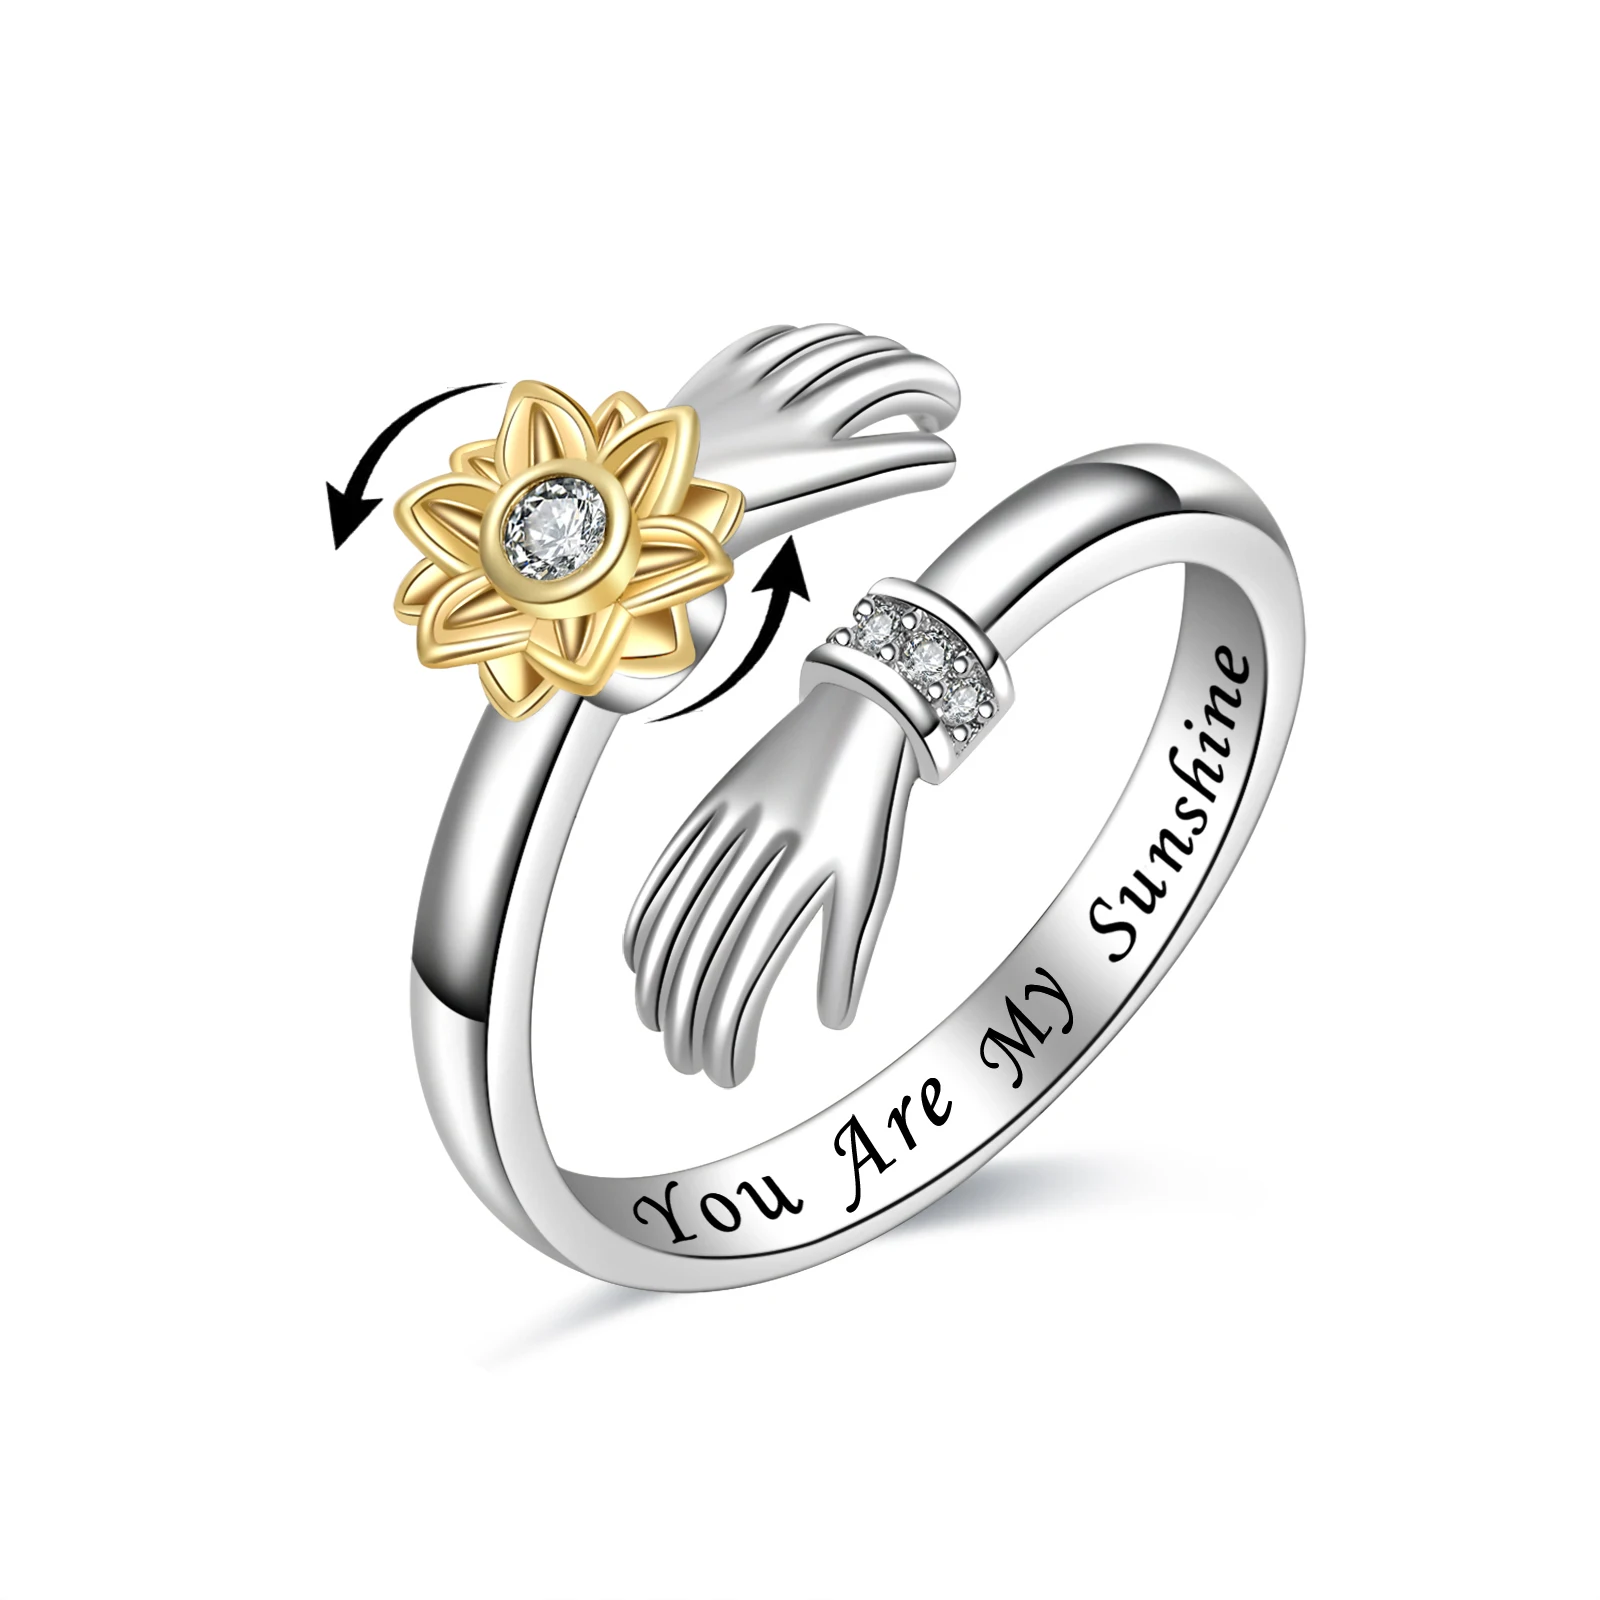 

Slovehoony 925 Silver Sunflower CZ Anxiety Relief Fidget Hug Ring You Are My Sunshine Couple Spinning Rings For Girl